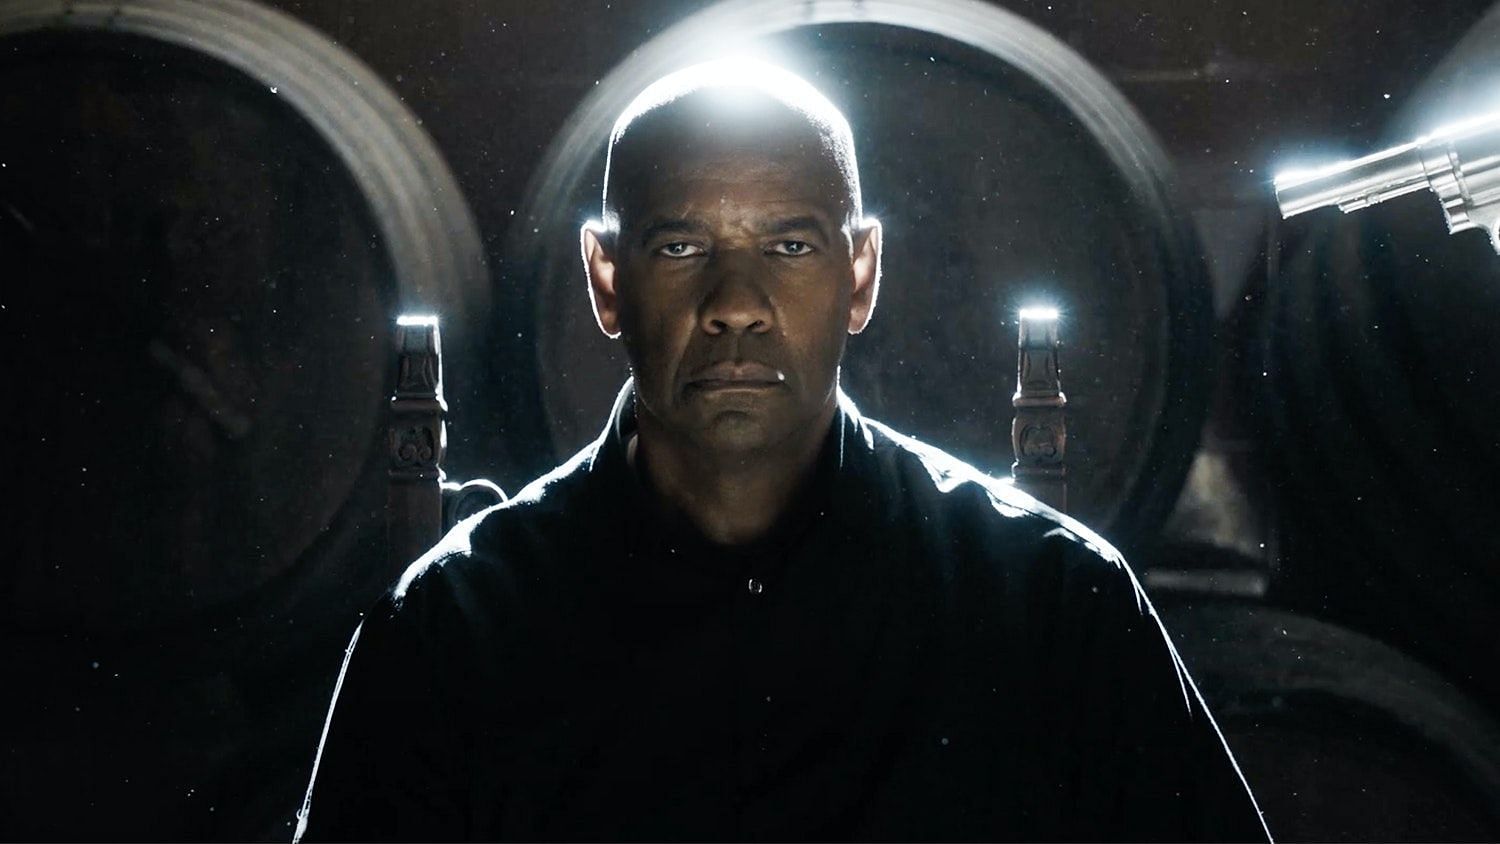 The possibilities are endless: Could Denzel Washington be the next Professor X or Darkseid? (Image via Columbia Pictures)